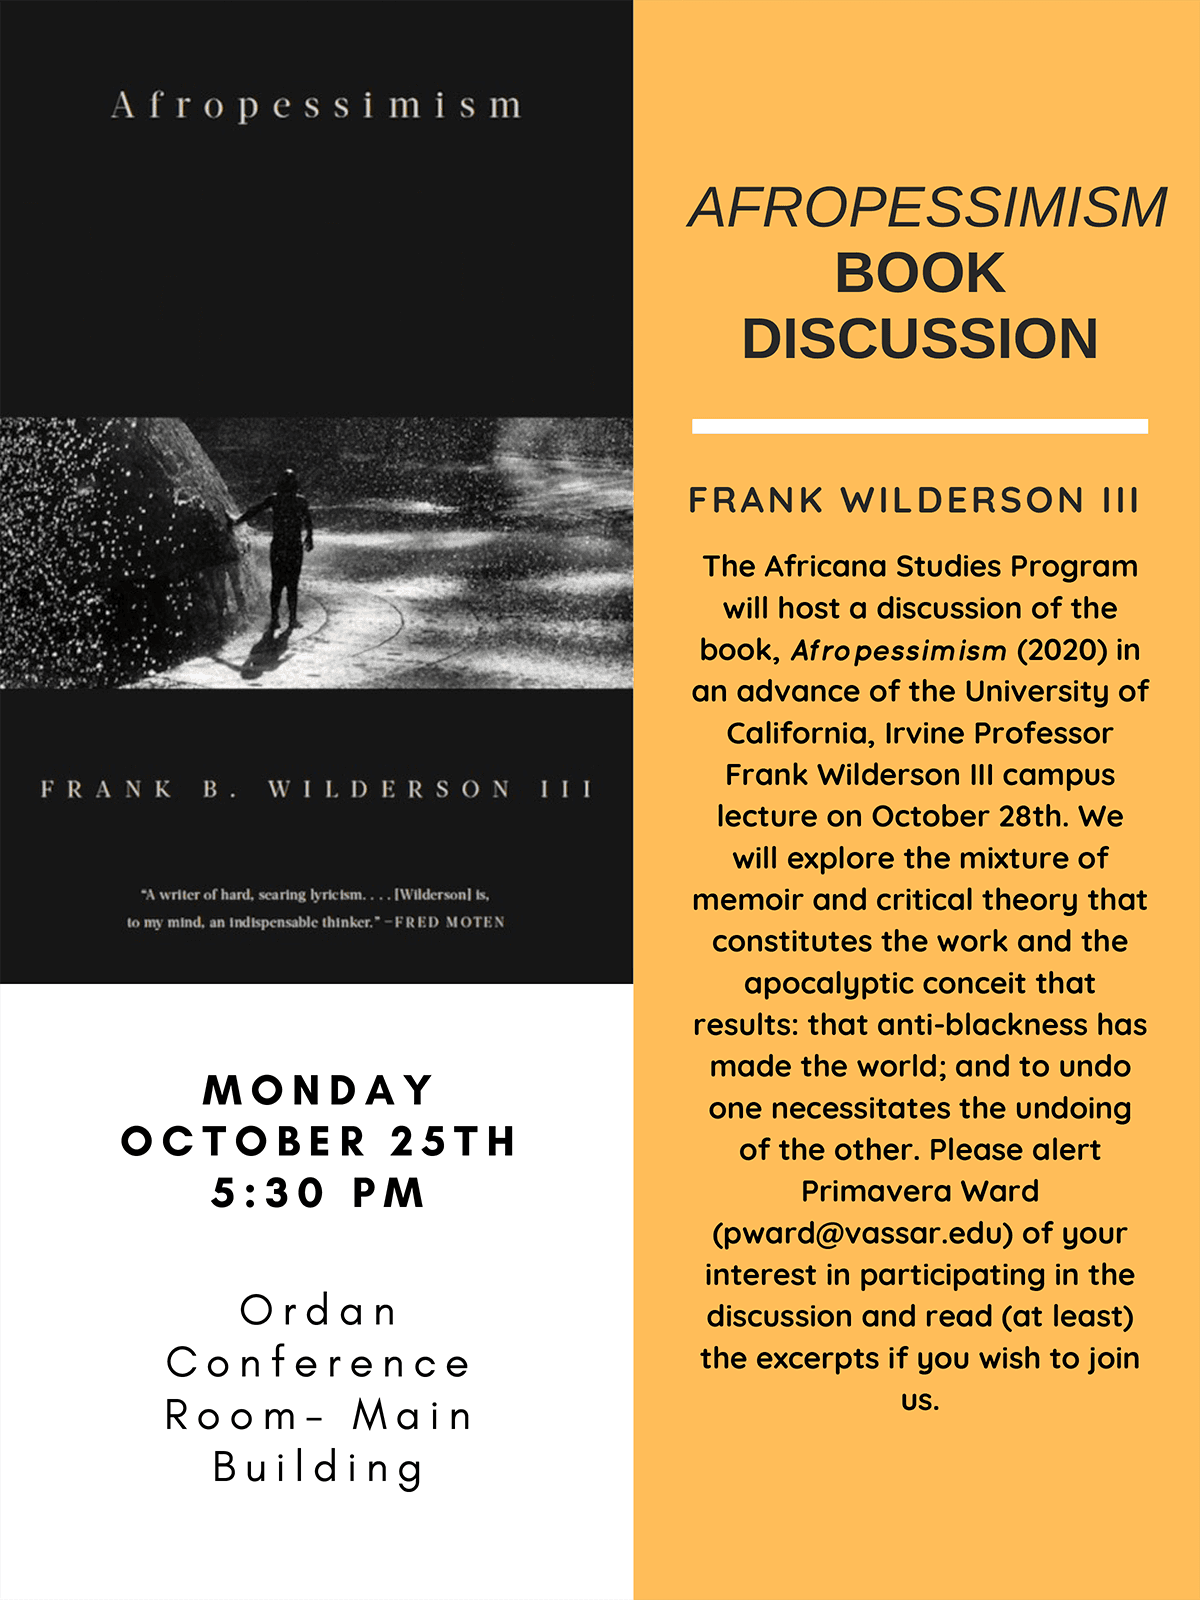 Afropessimism Book Discussion, Frank B. Wilderson III. Monday October 25th 5:30 p.m., Ordan Conference Room, Main Building.